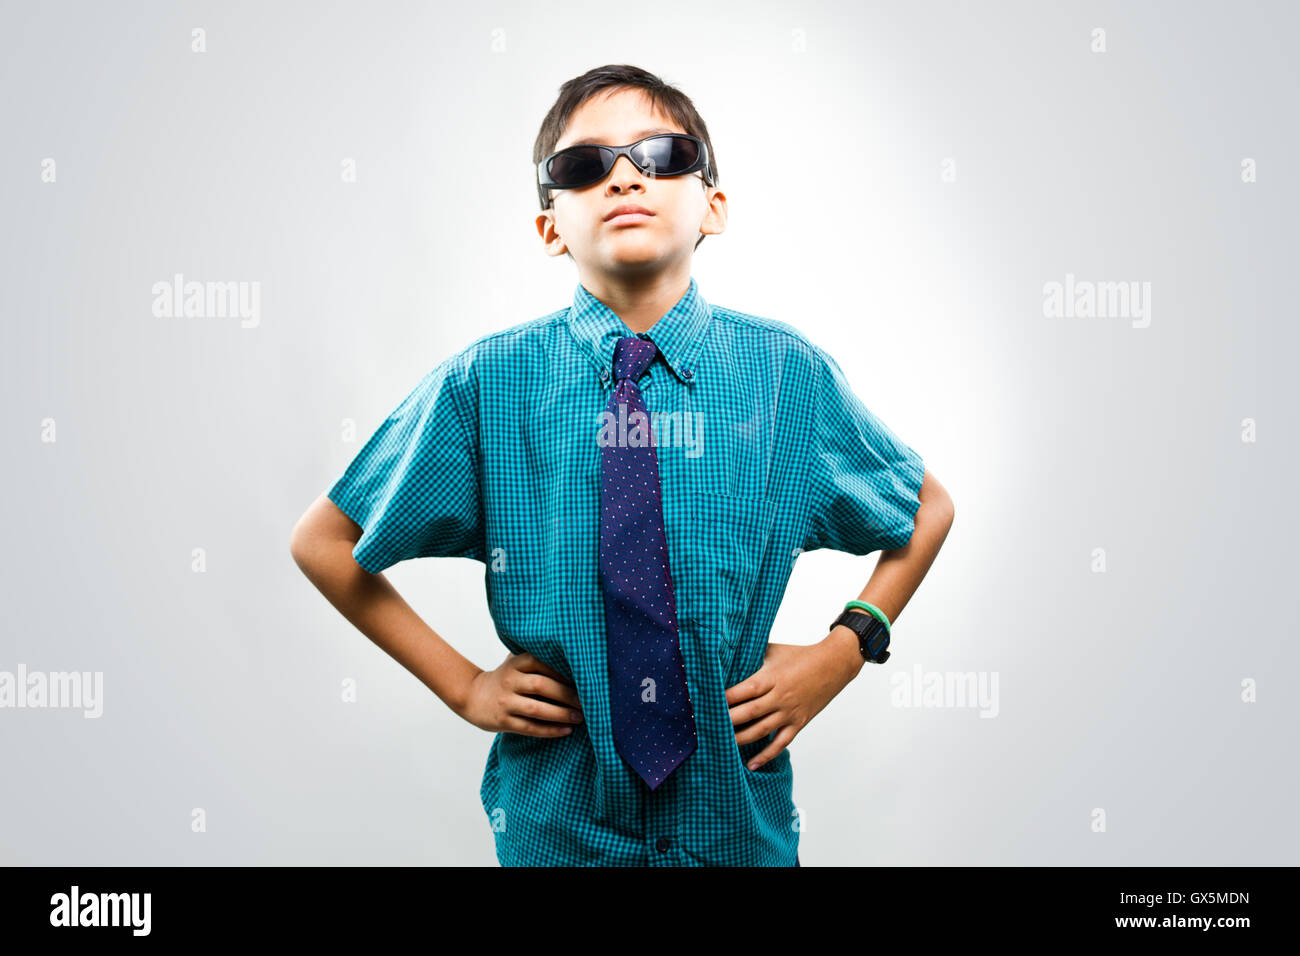 Portrait of a boy wearing sunglasses looking at camera in light grey background Stock Photo